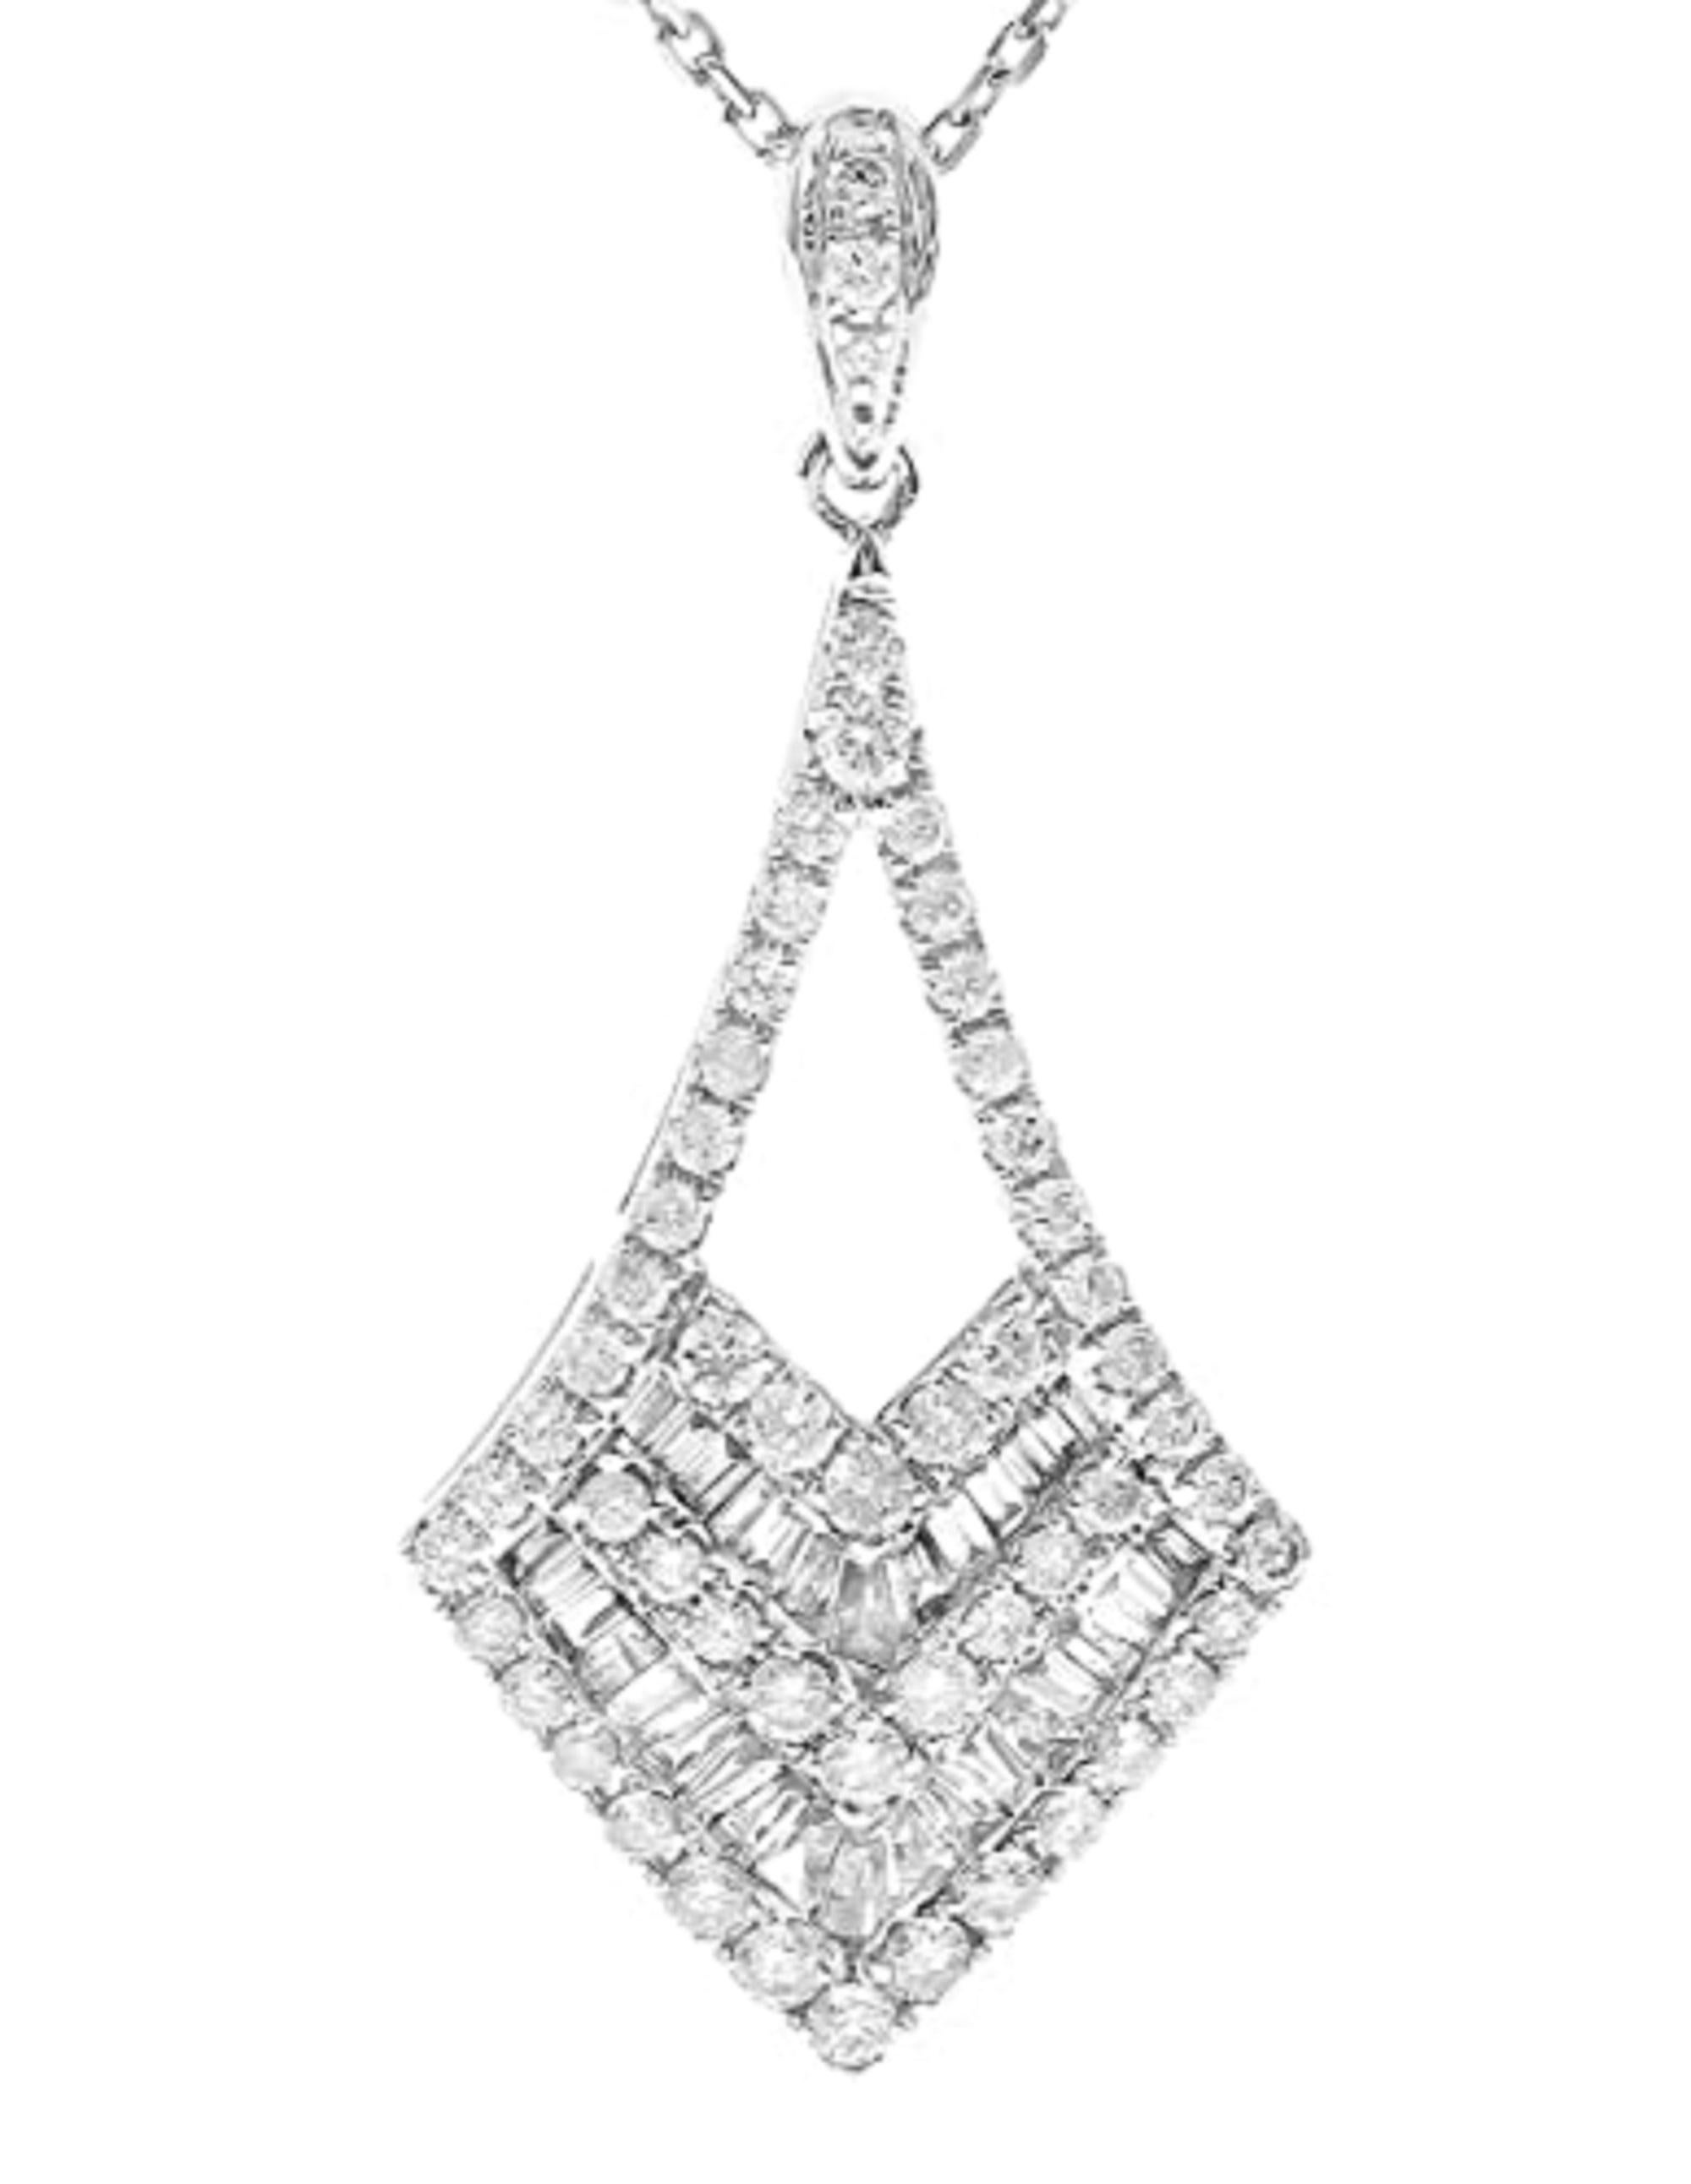 Decorate yourself in elegance with this Pendant is crafted from 14-karat White Gold by Gin & Grace. This Pendant is baguette-cut White Diamond (26 Pcs) 0.25 Carat and Round-cut White Diamond (56 Pcs) 0.53 Carat. This Pendant is weight 1.87 grams and